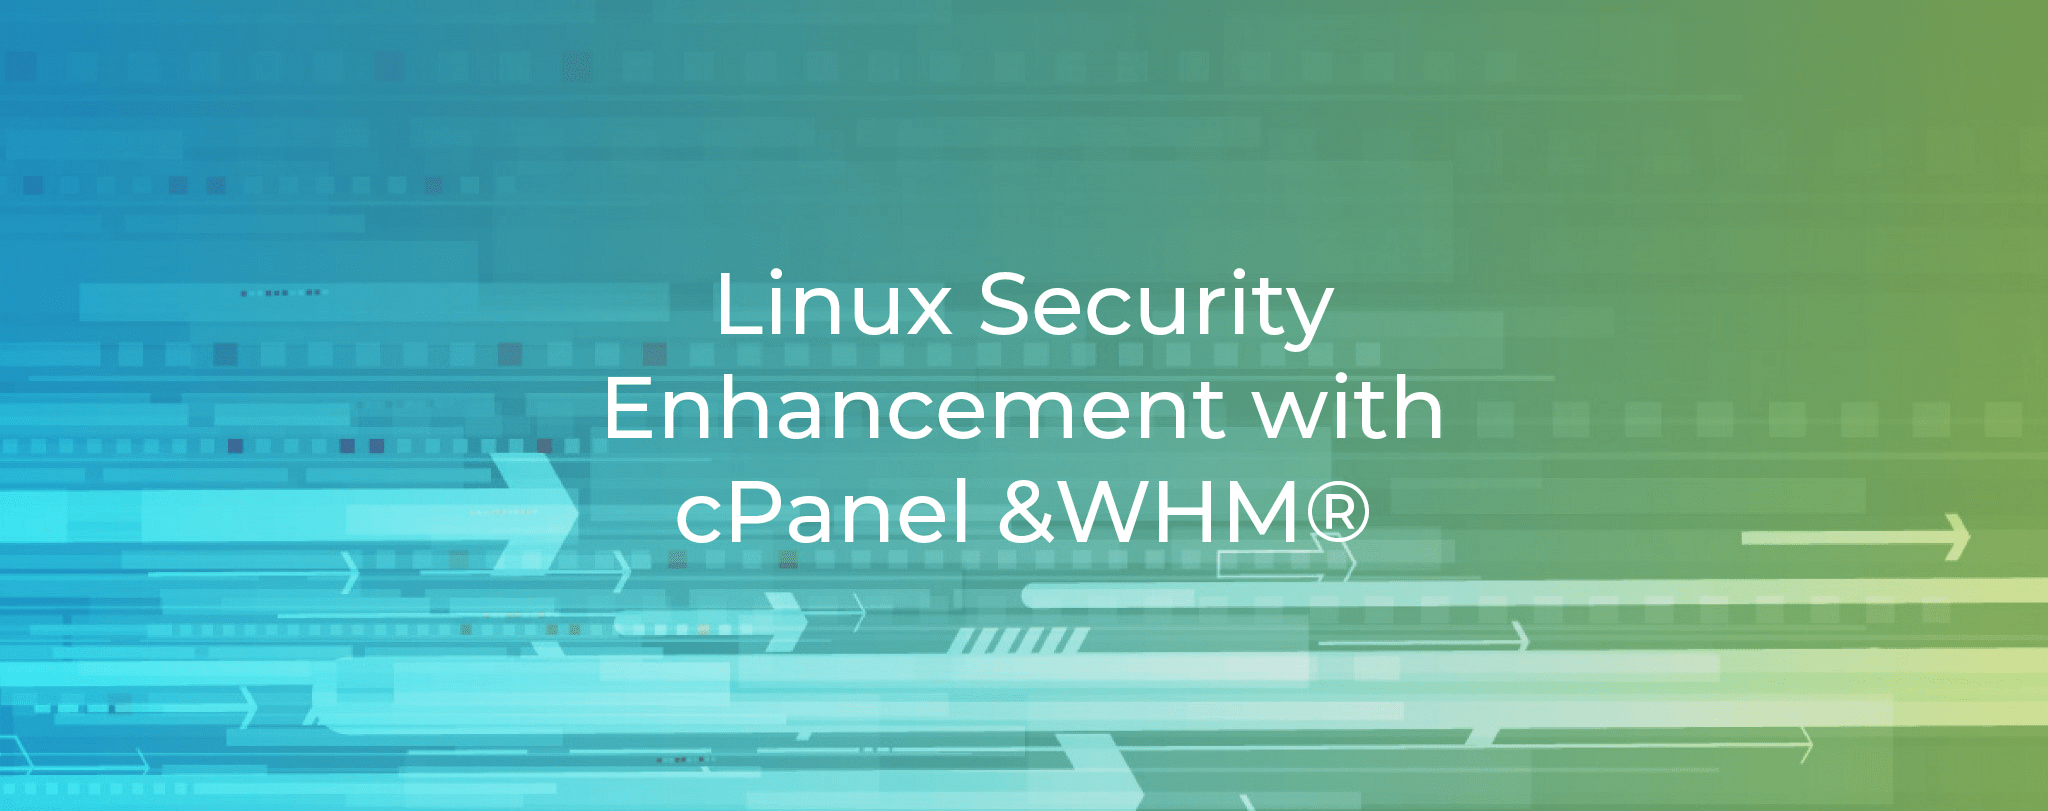 Linux Security Enhancement With cPanel and WHM